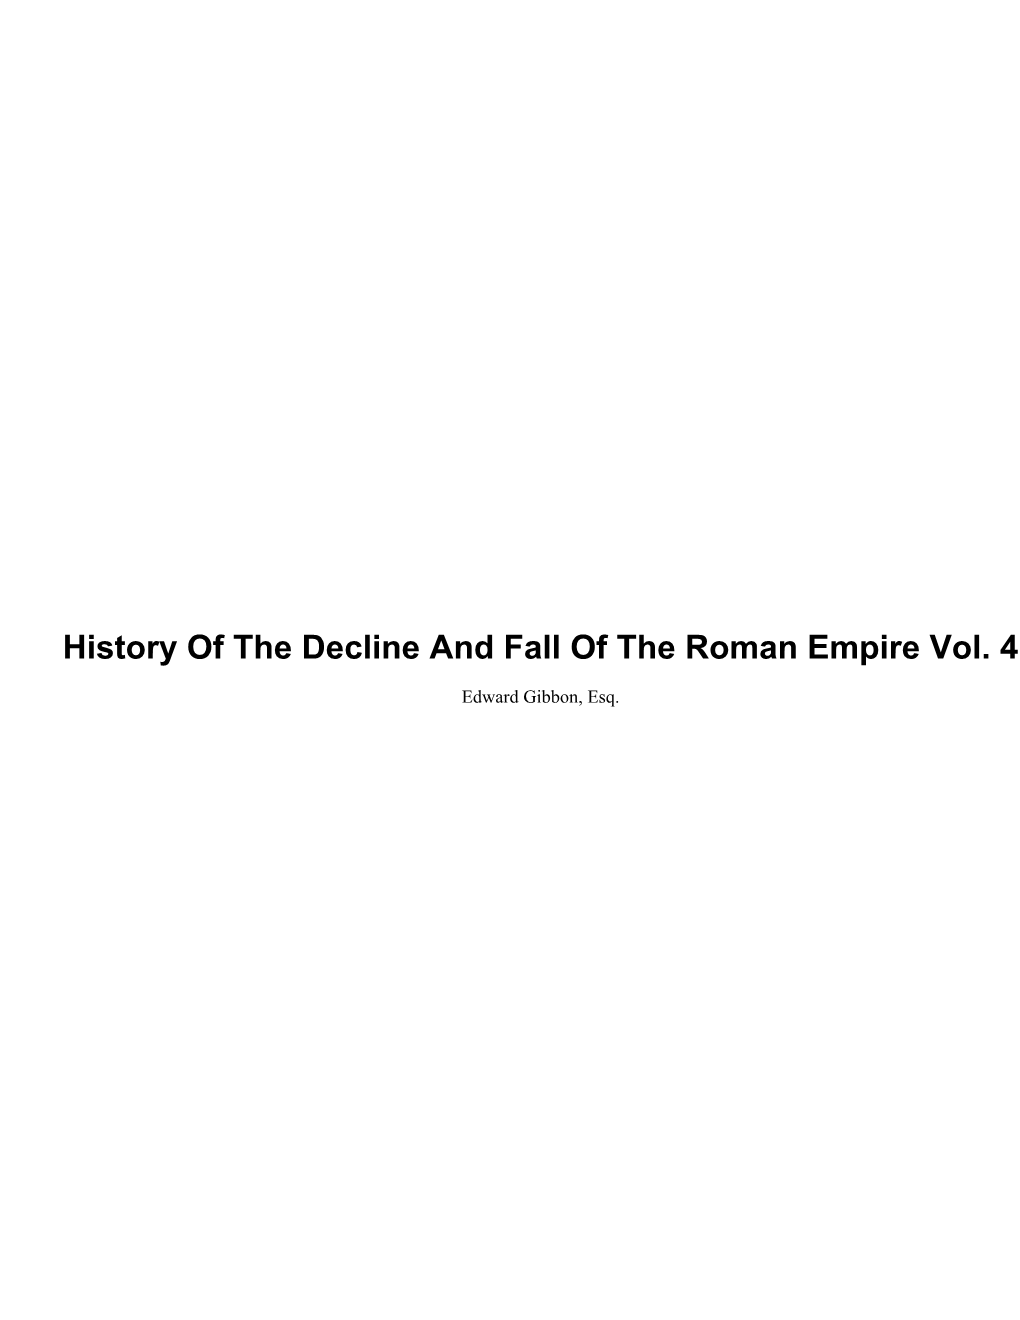 History of the Decline and Fall of the Roman Empire Vol